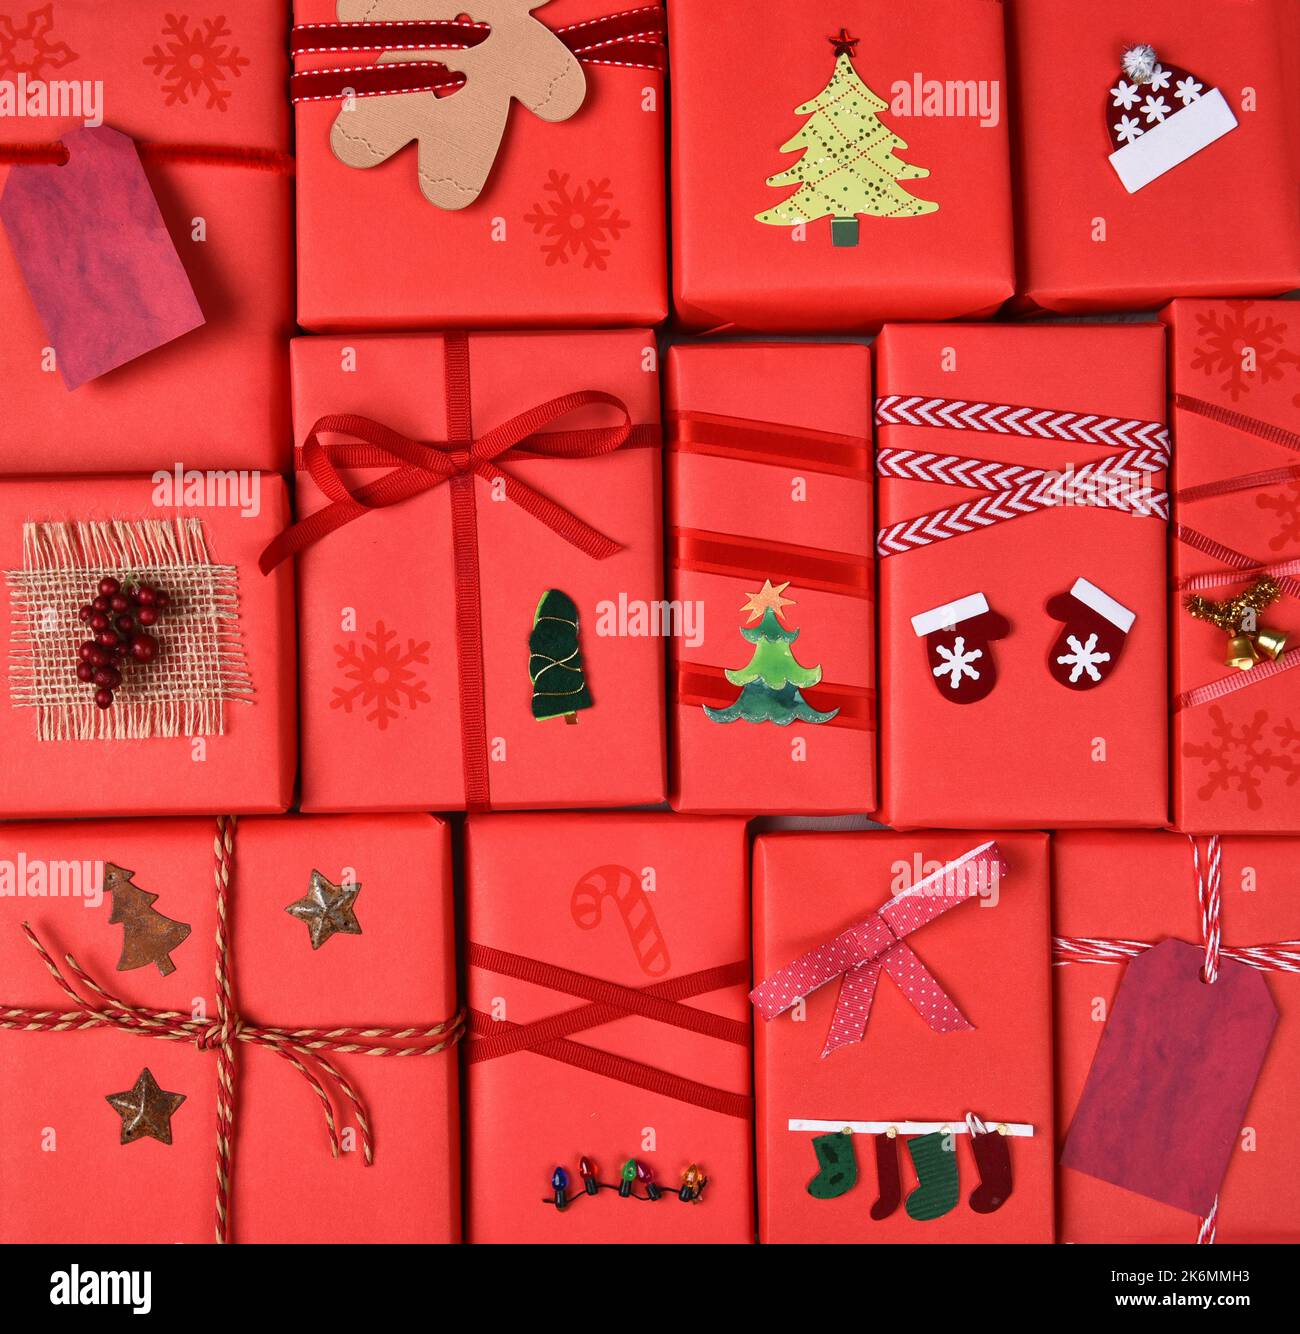 Christmas Presents. Closeup of gifts wrapped in red paper with ribbons and decorations. Square format filling the frame. Stock Photo